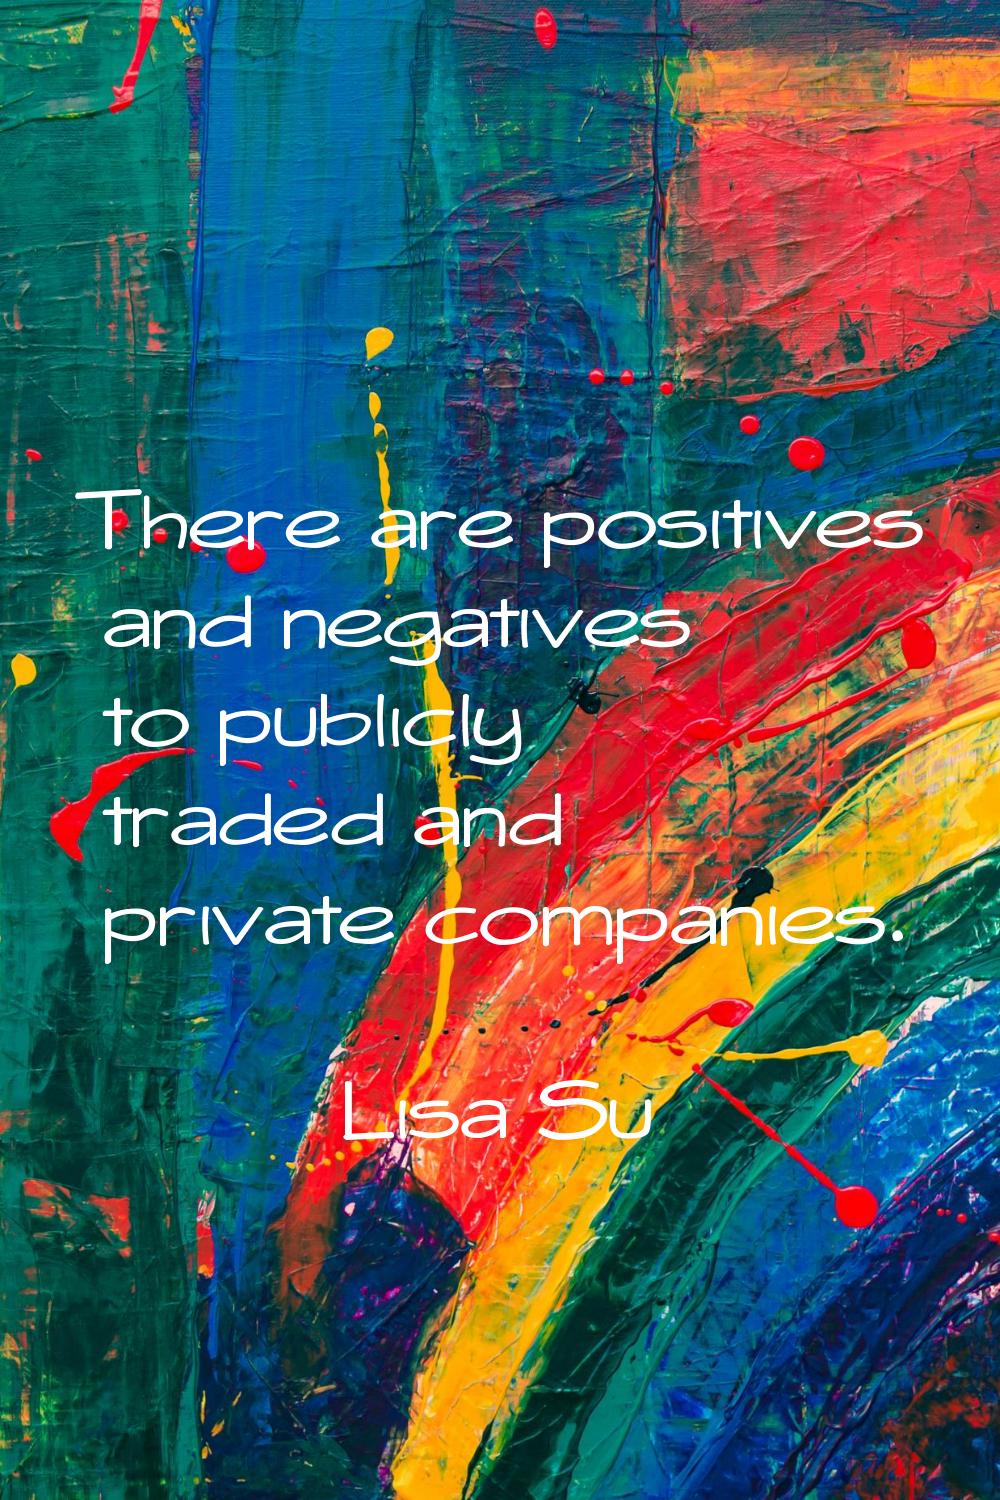 There are positives and negatives to publicly traded and private companies.